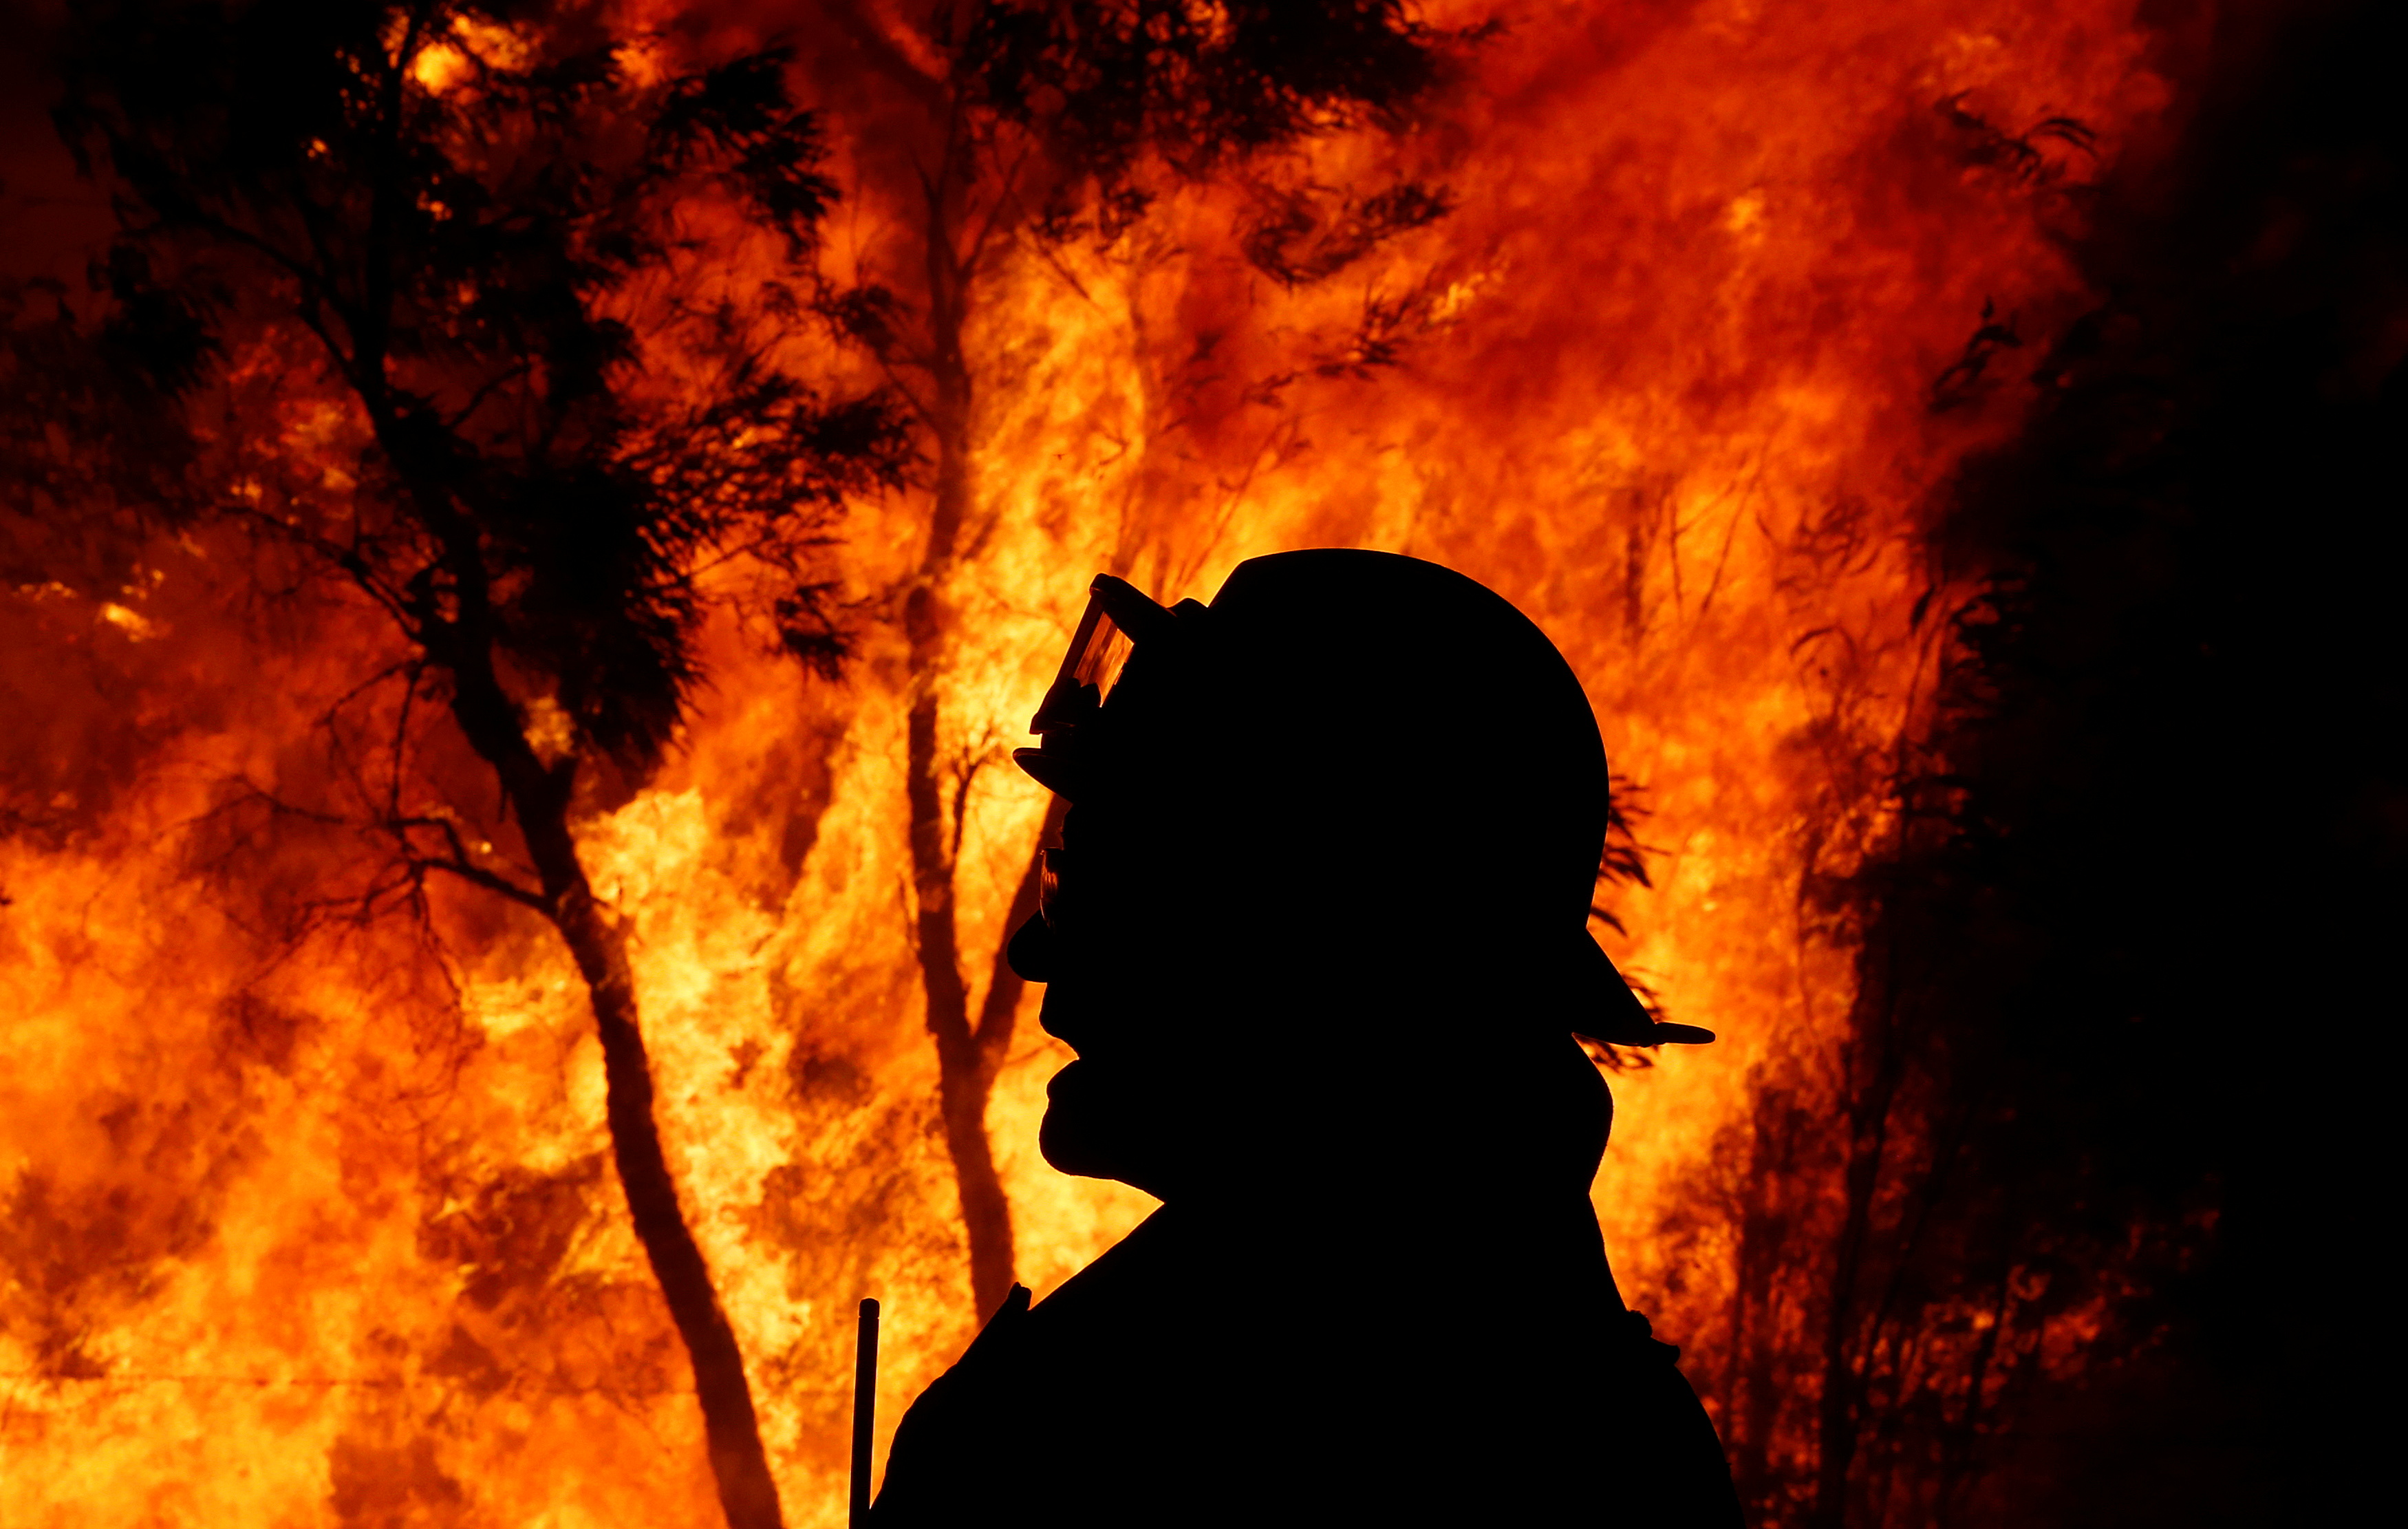 A firefighter gives instructions near a bushfire at the Windsor Downs Nature Reserve, near Sydney